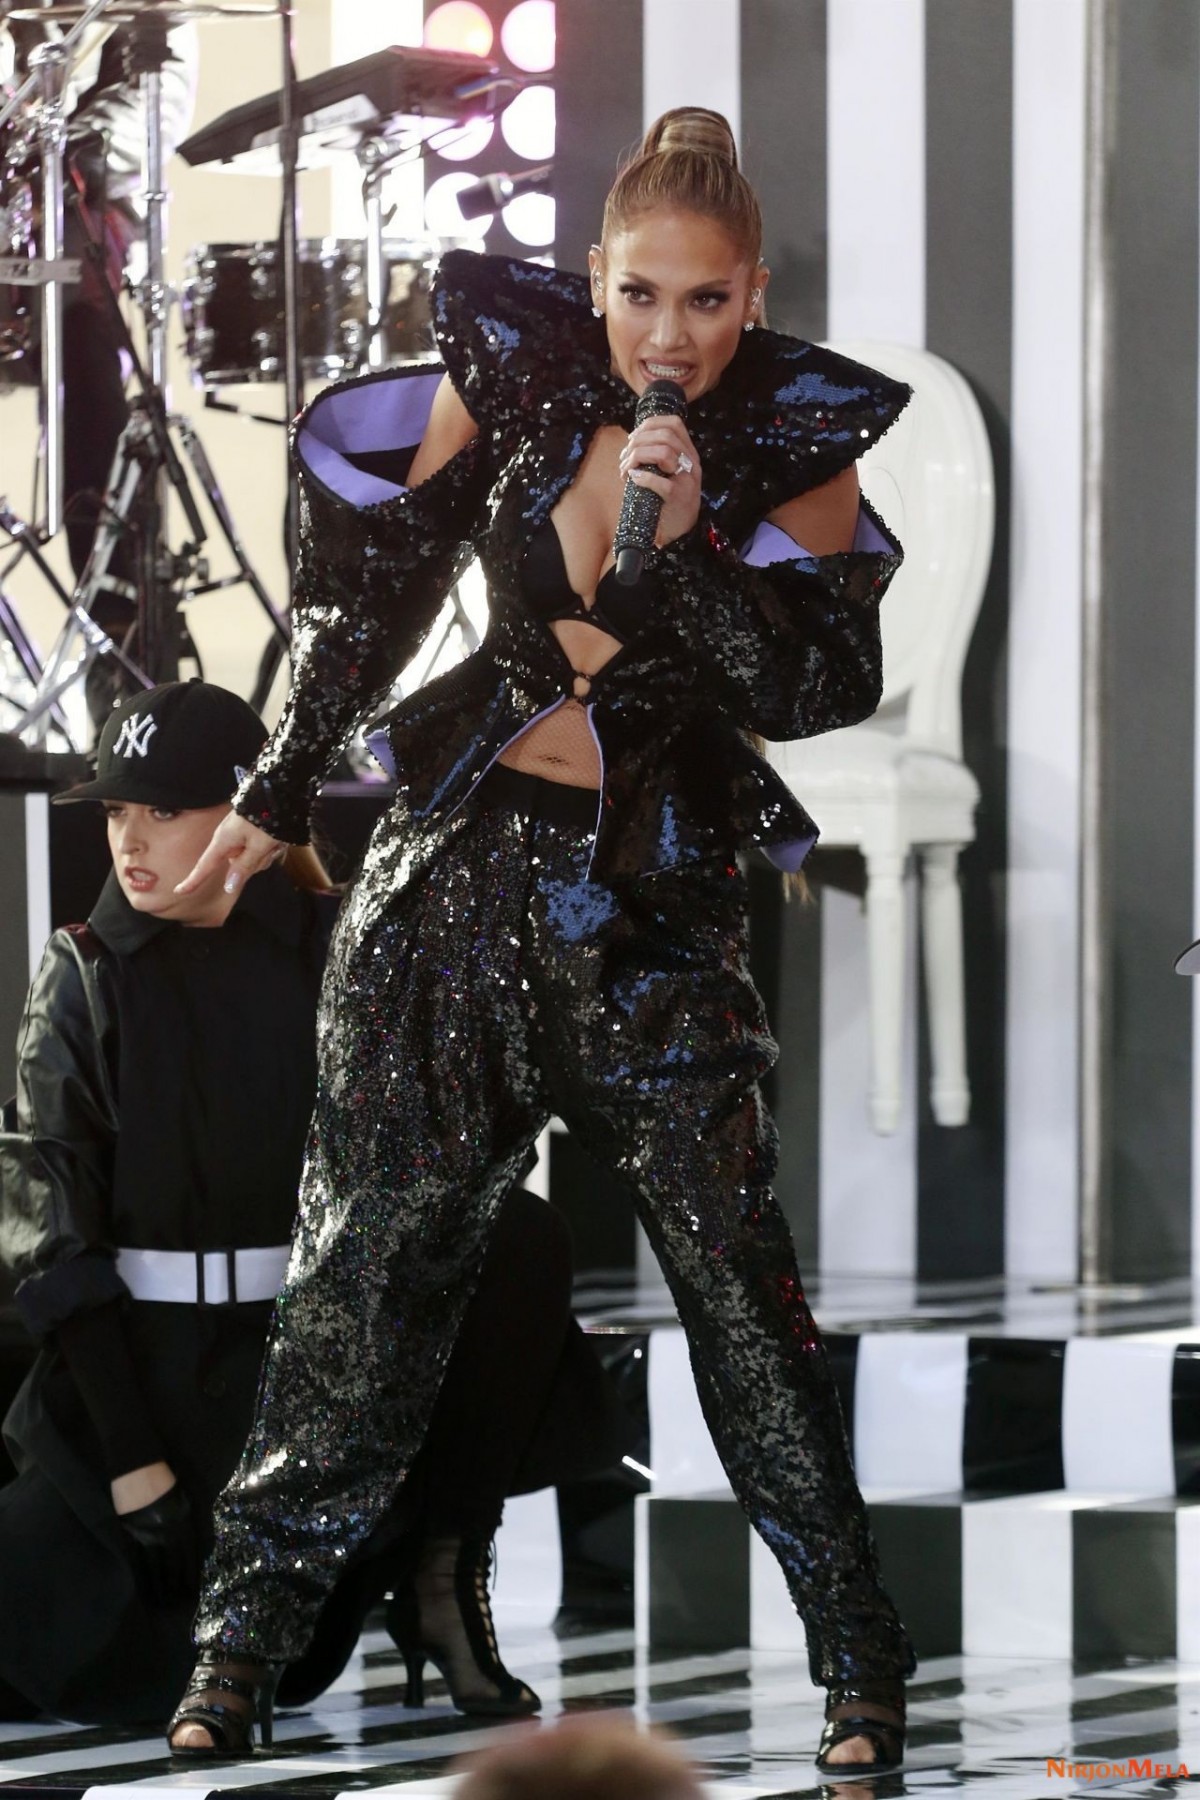 jennifer-lopez-performs-on-nbc-s-today-show-in-new-york-05-06-2019-0.jpg